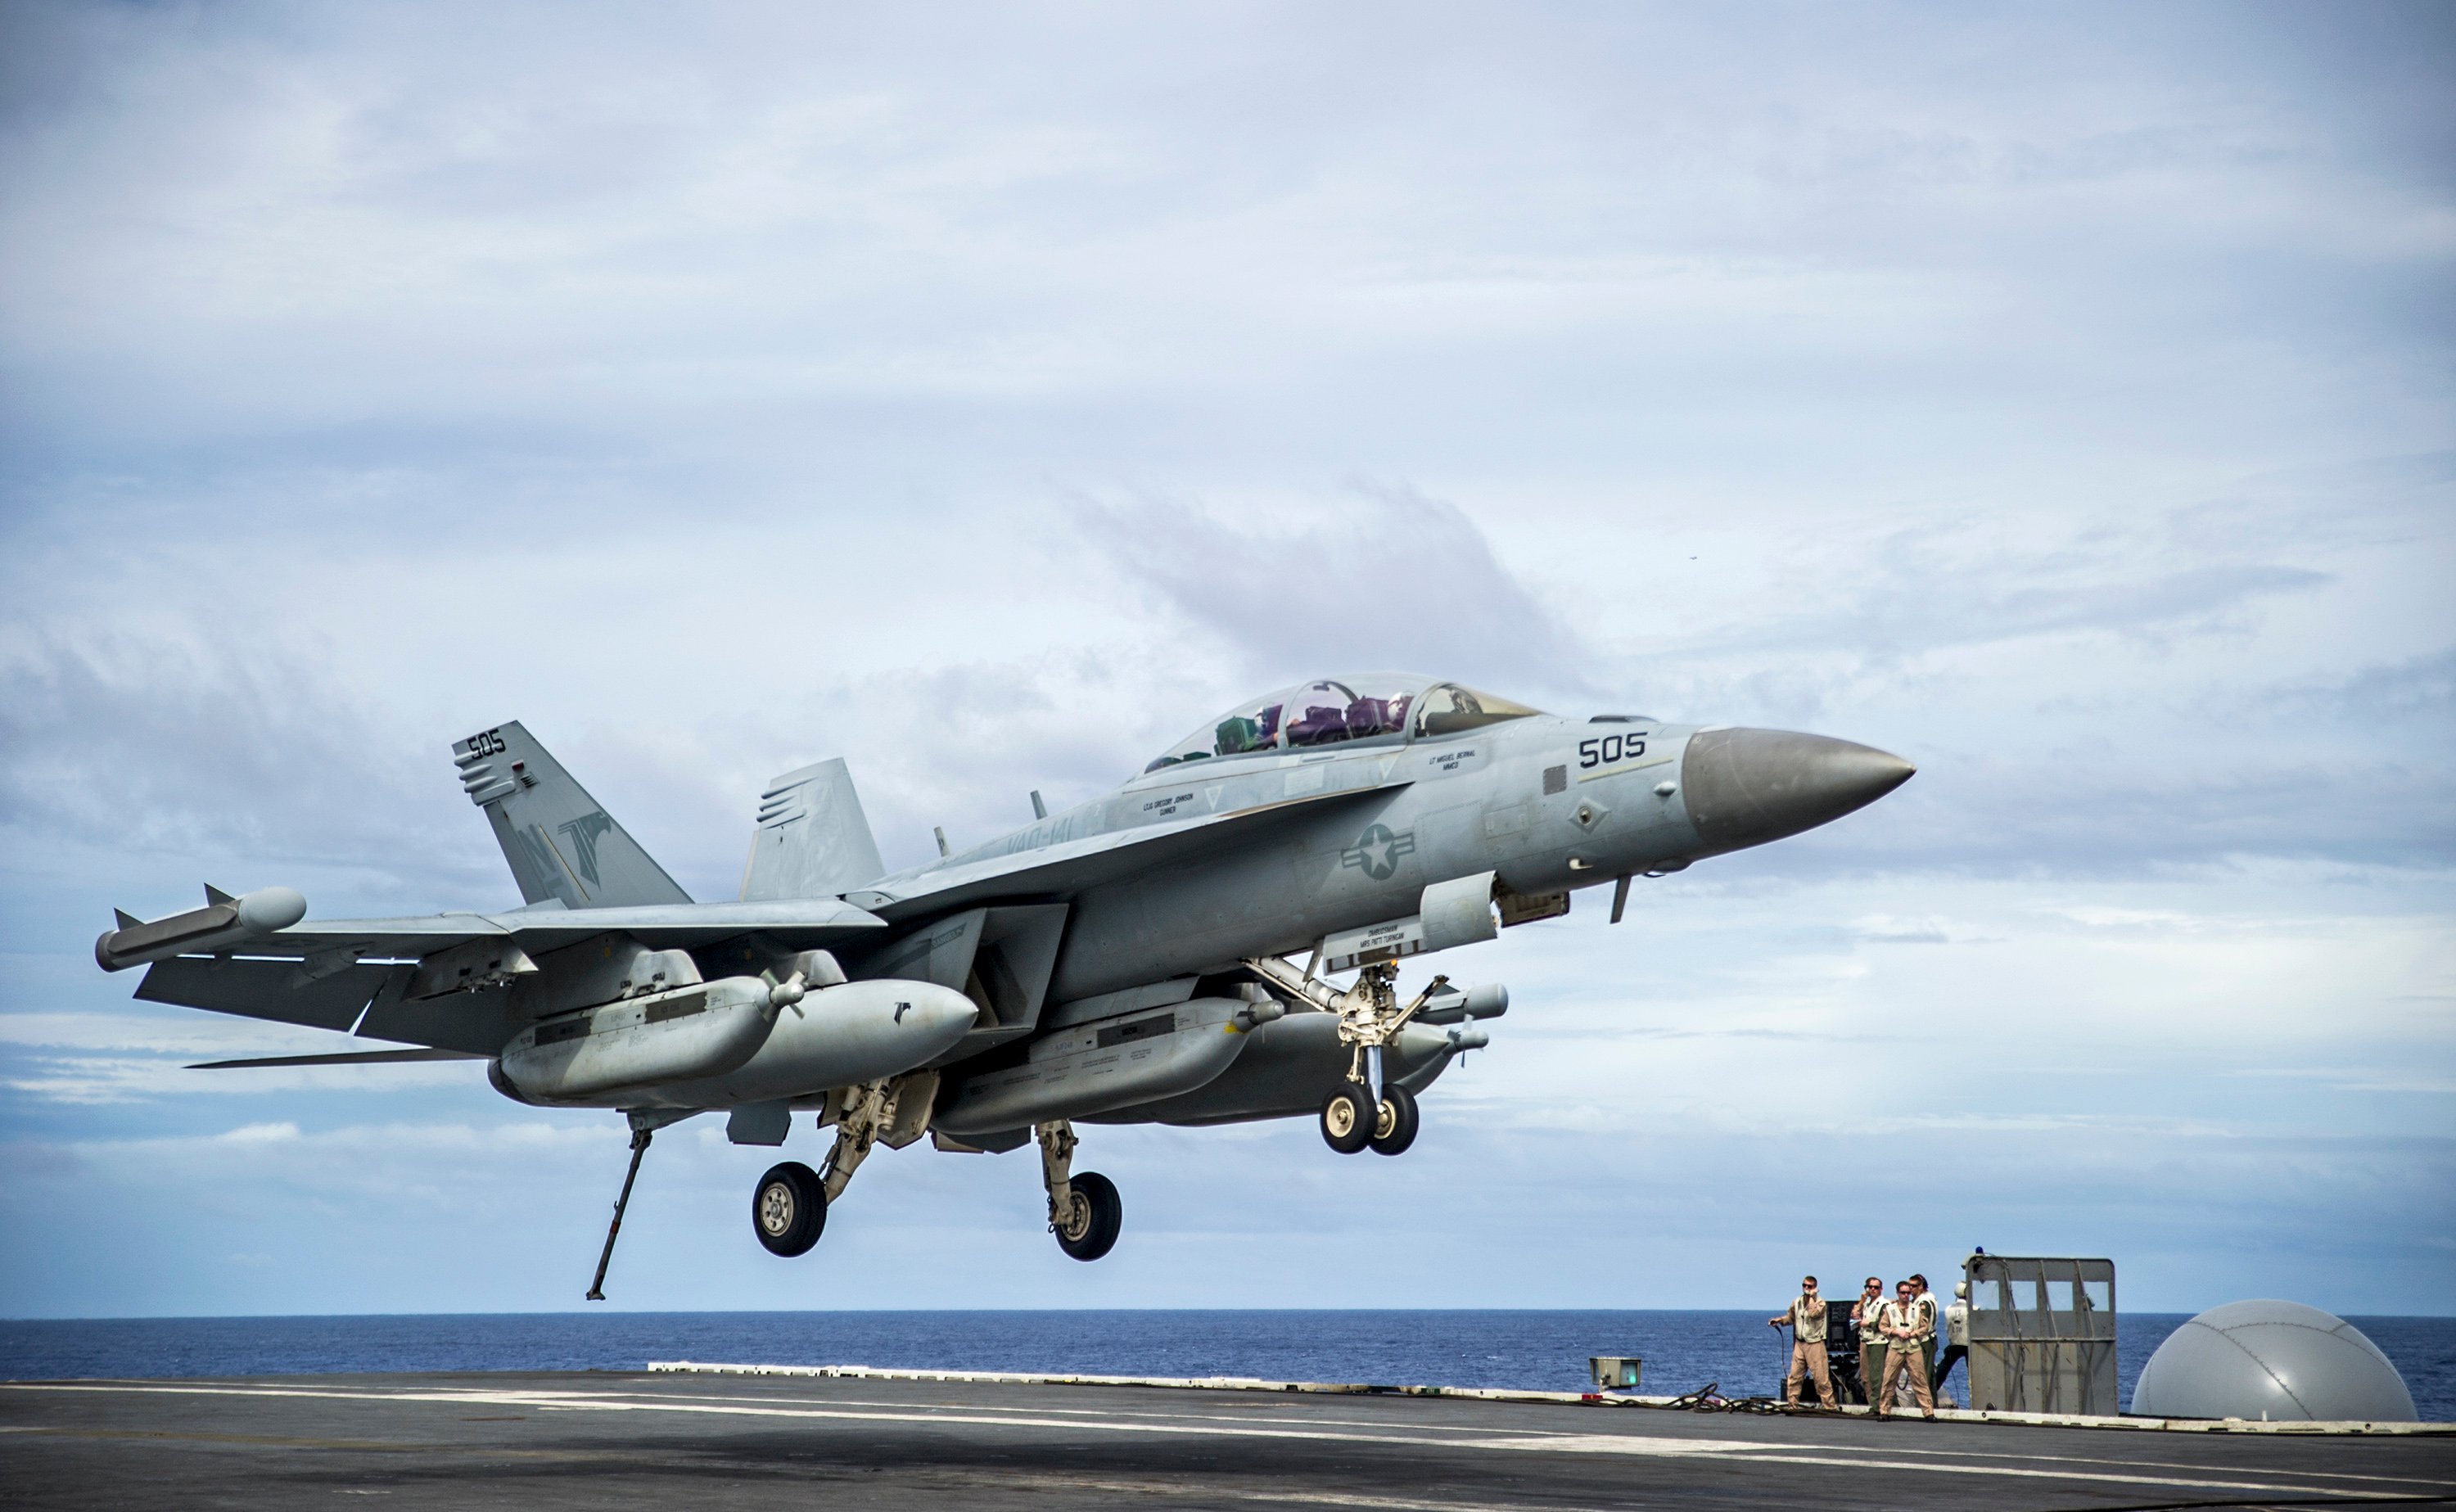 An E/A-18G Growler from the Shadowhawks of Electronic Attack Squadron (VAQ) 141 prepares to make an arrested landing on the flight deck of the Nimitz-class aircraft carrier USS George Washington (CVN 73) on Nov. 3, 2014. US Navy photo.